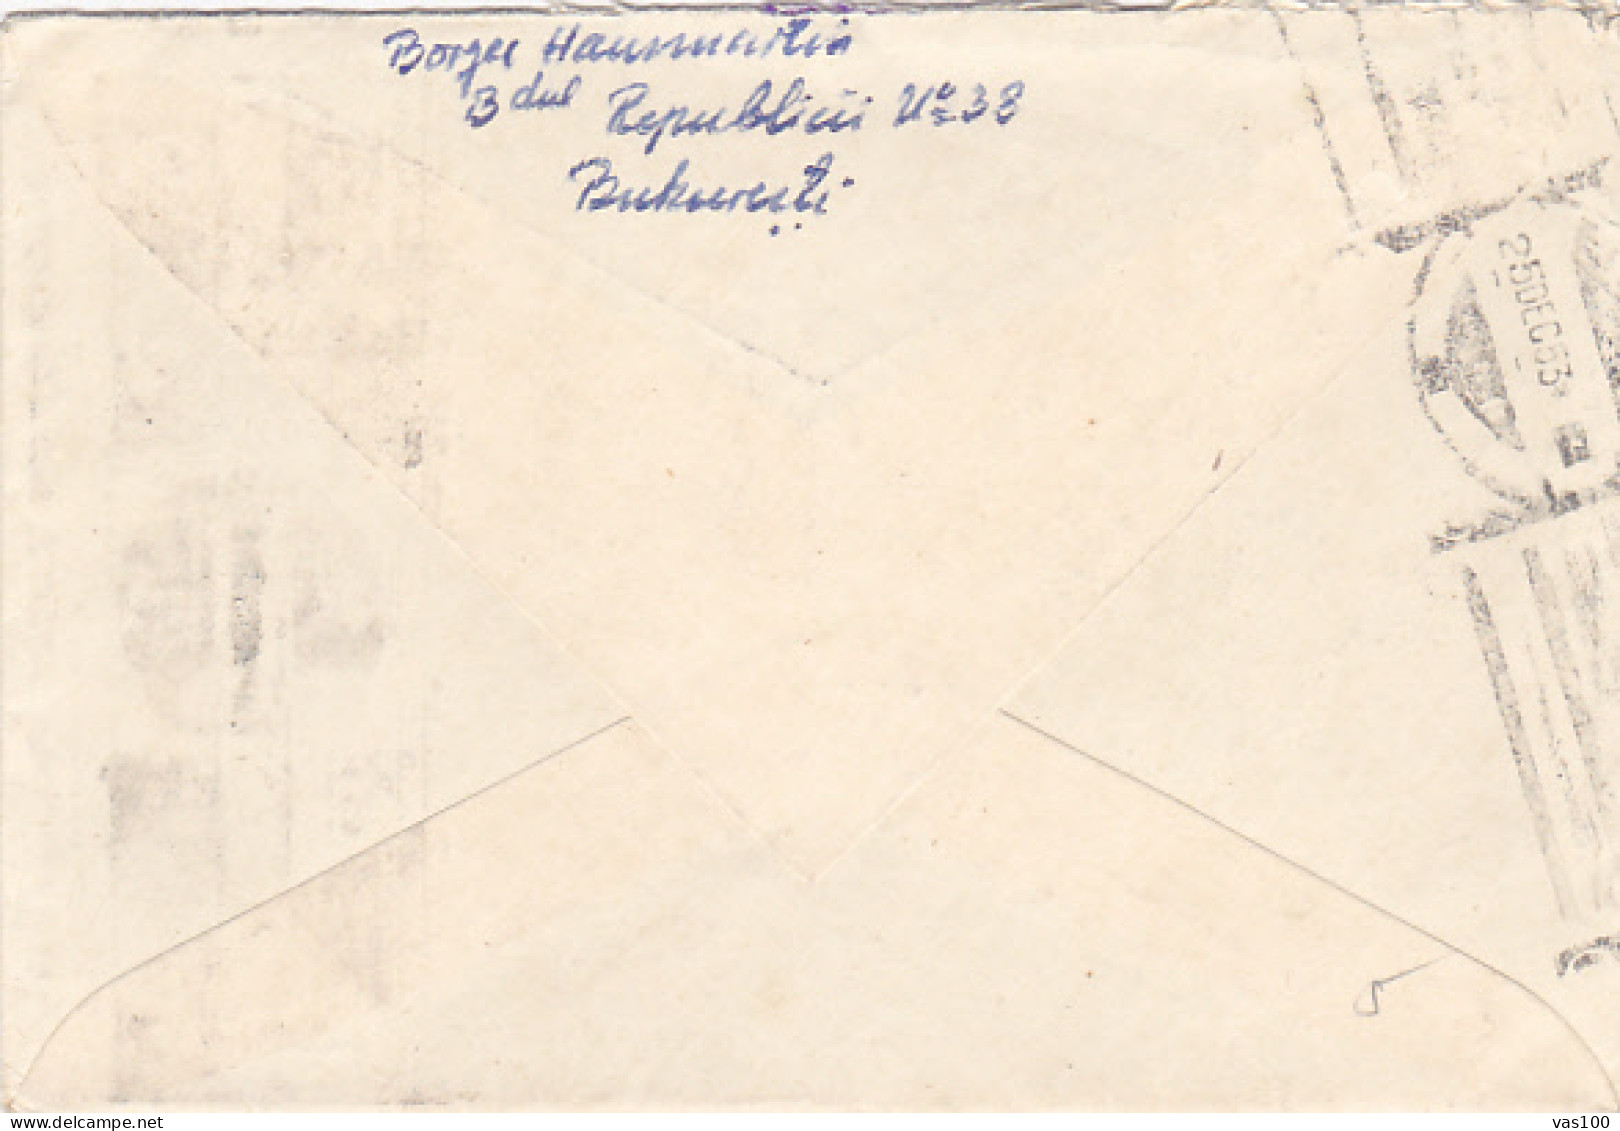 ARMY DAY, SOLDIER, STAMP ON COVER, 1953, ROMANIA - Briefe U. Dokumente